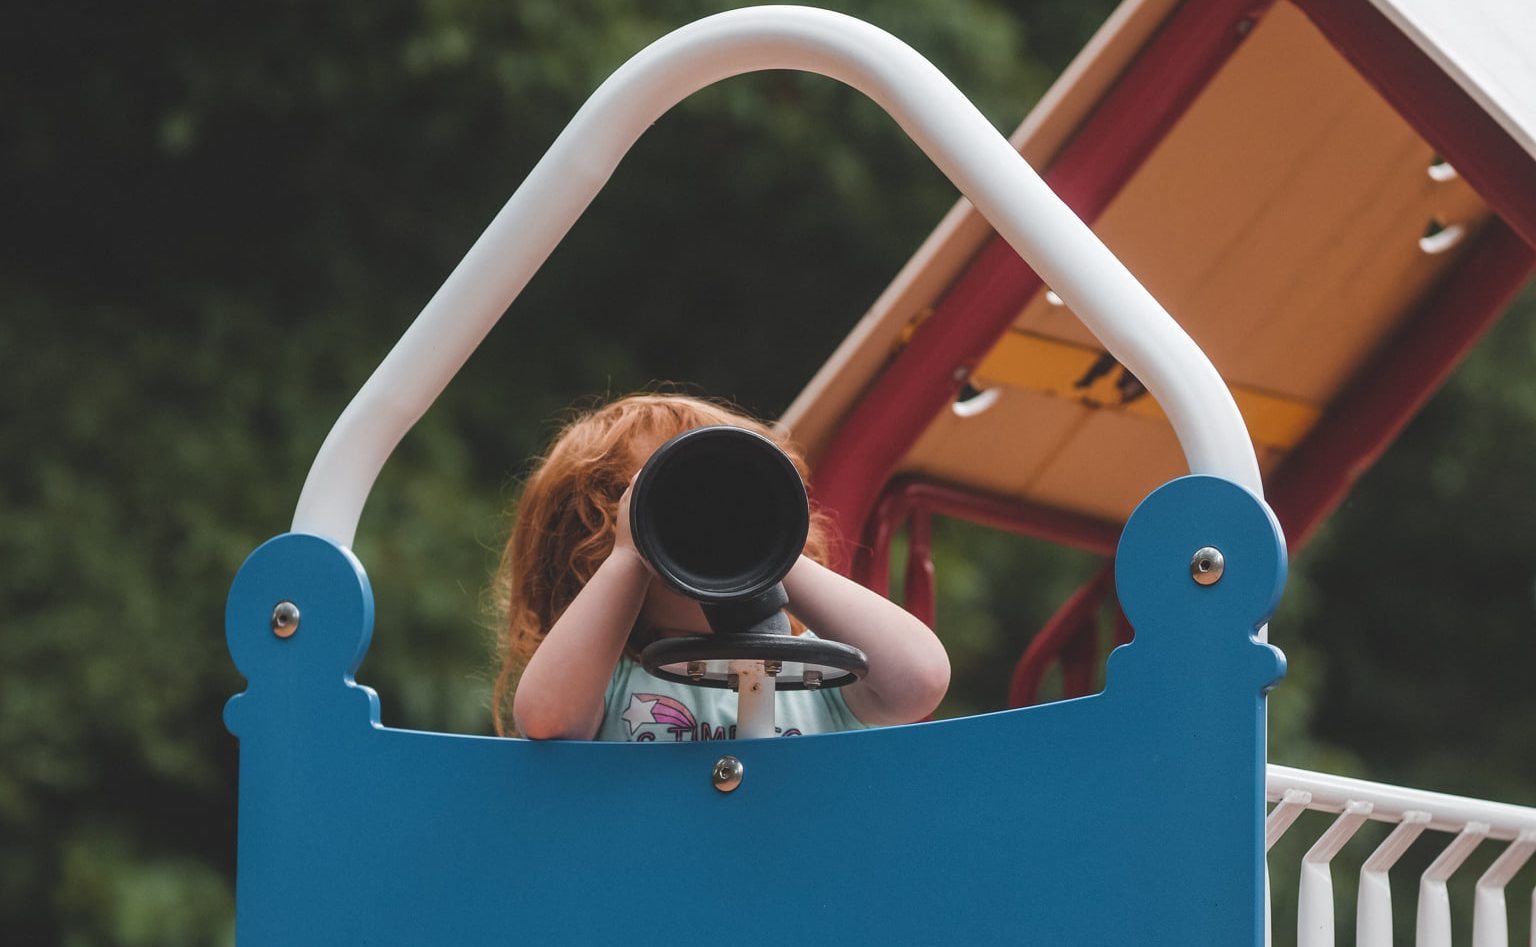 A preschool student in the playground looking over a toy telescope